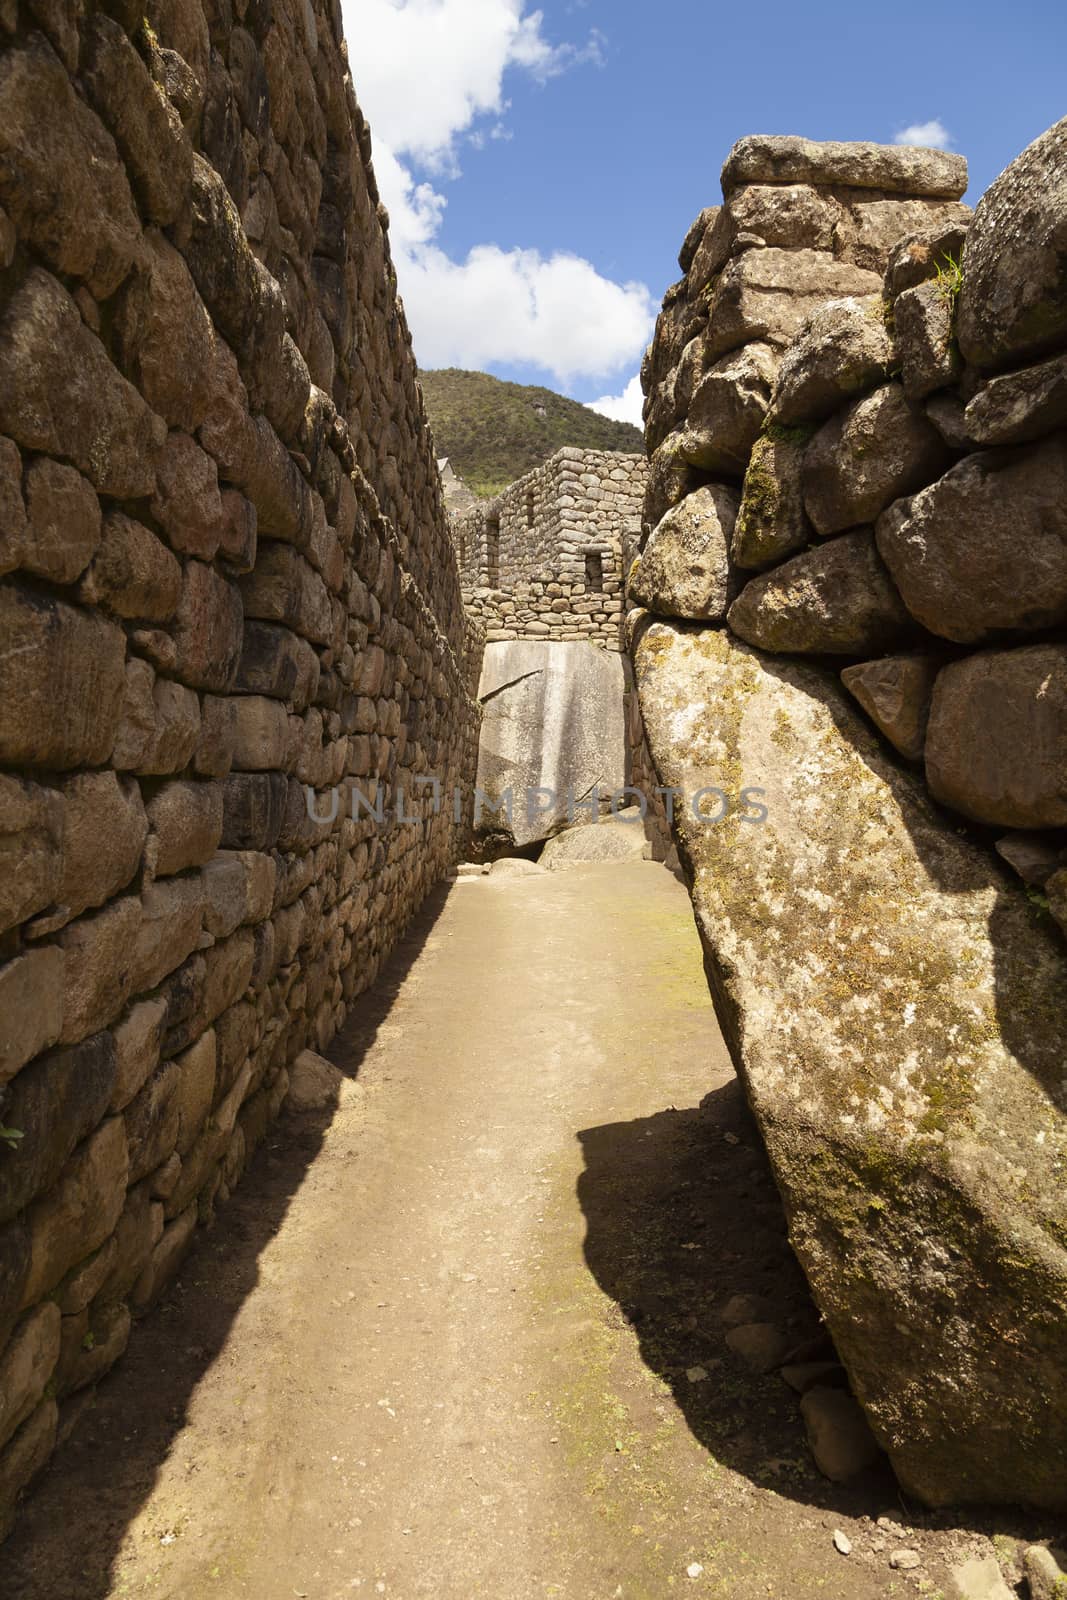 Architecture and details of the Inca constructions in Machu Picchu, Peru by alvarobueno